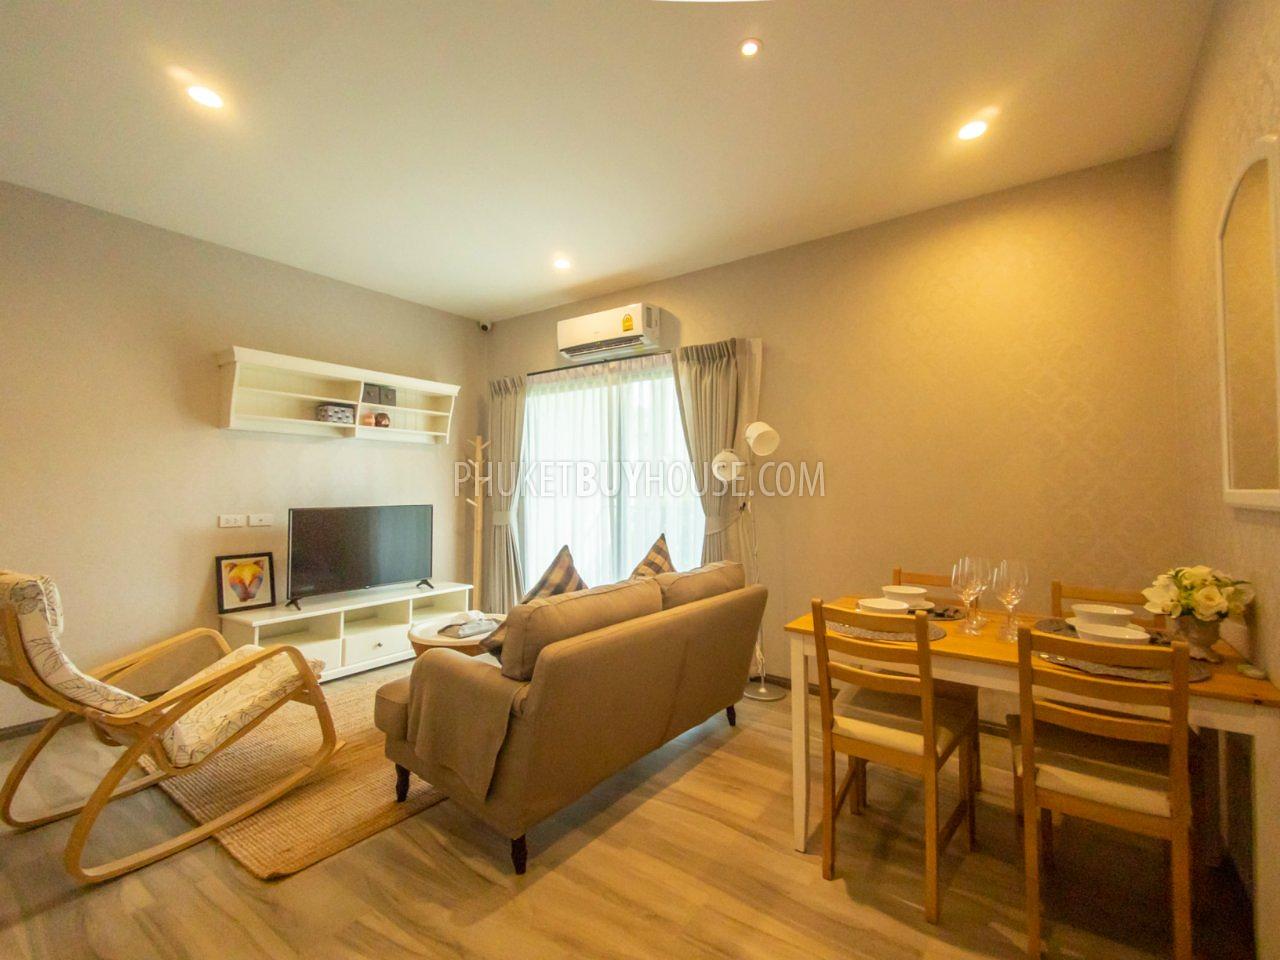 NAY6197: 1 Bedroom Apartment in a New Project within Walking Distance to Nai Yang Beach. Photo #3